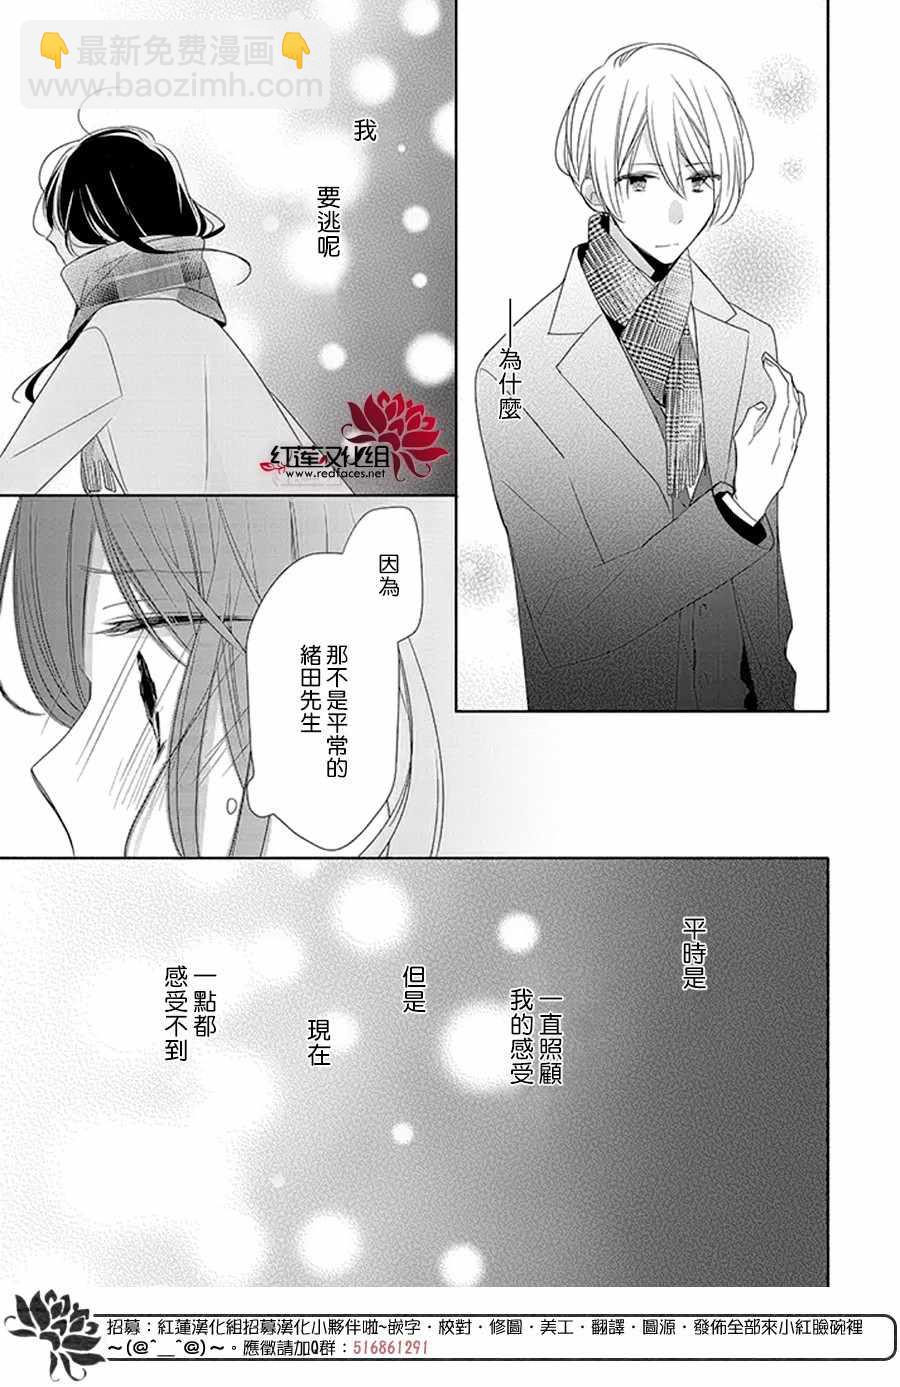 If given a second chance - 18話 - 4